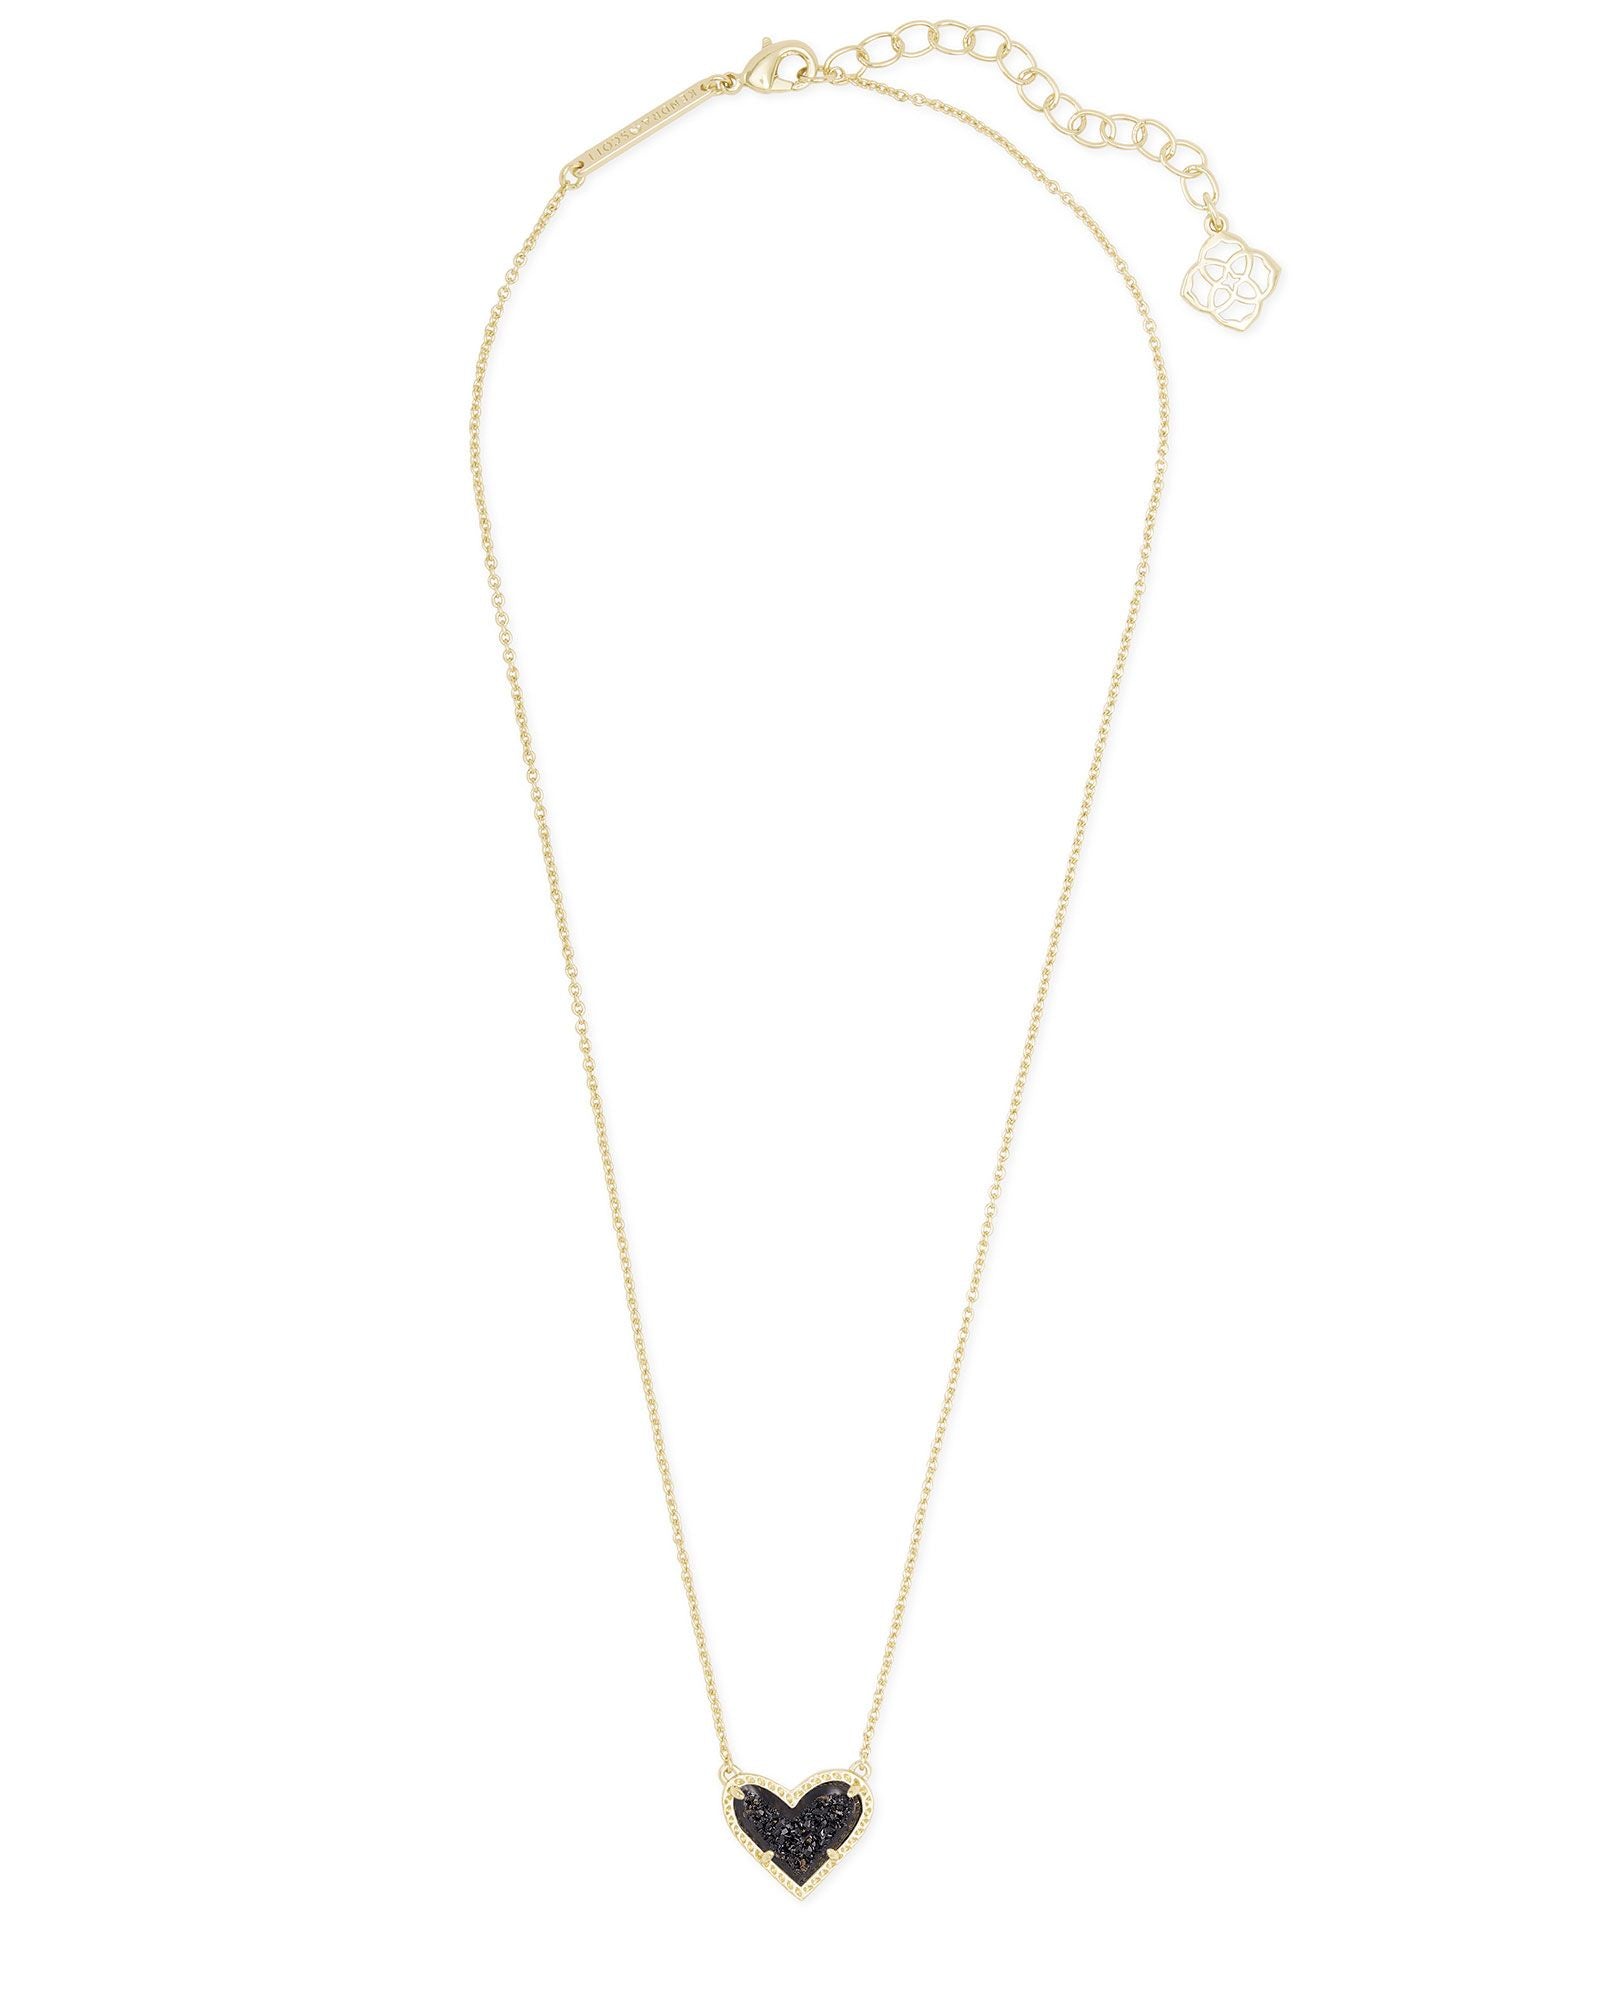 Kendra Scott | Ari Heart Gold Pendant Necklace in Black Drusy - Giddy Up Glamour Boutique